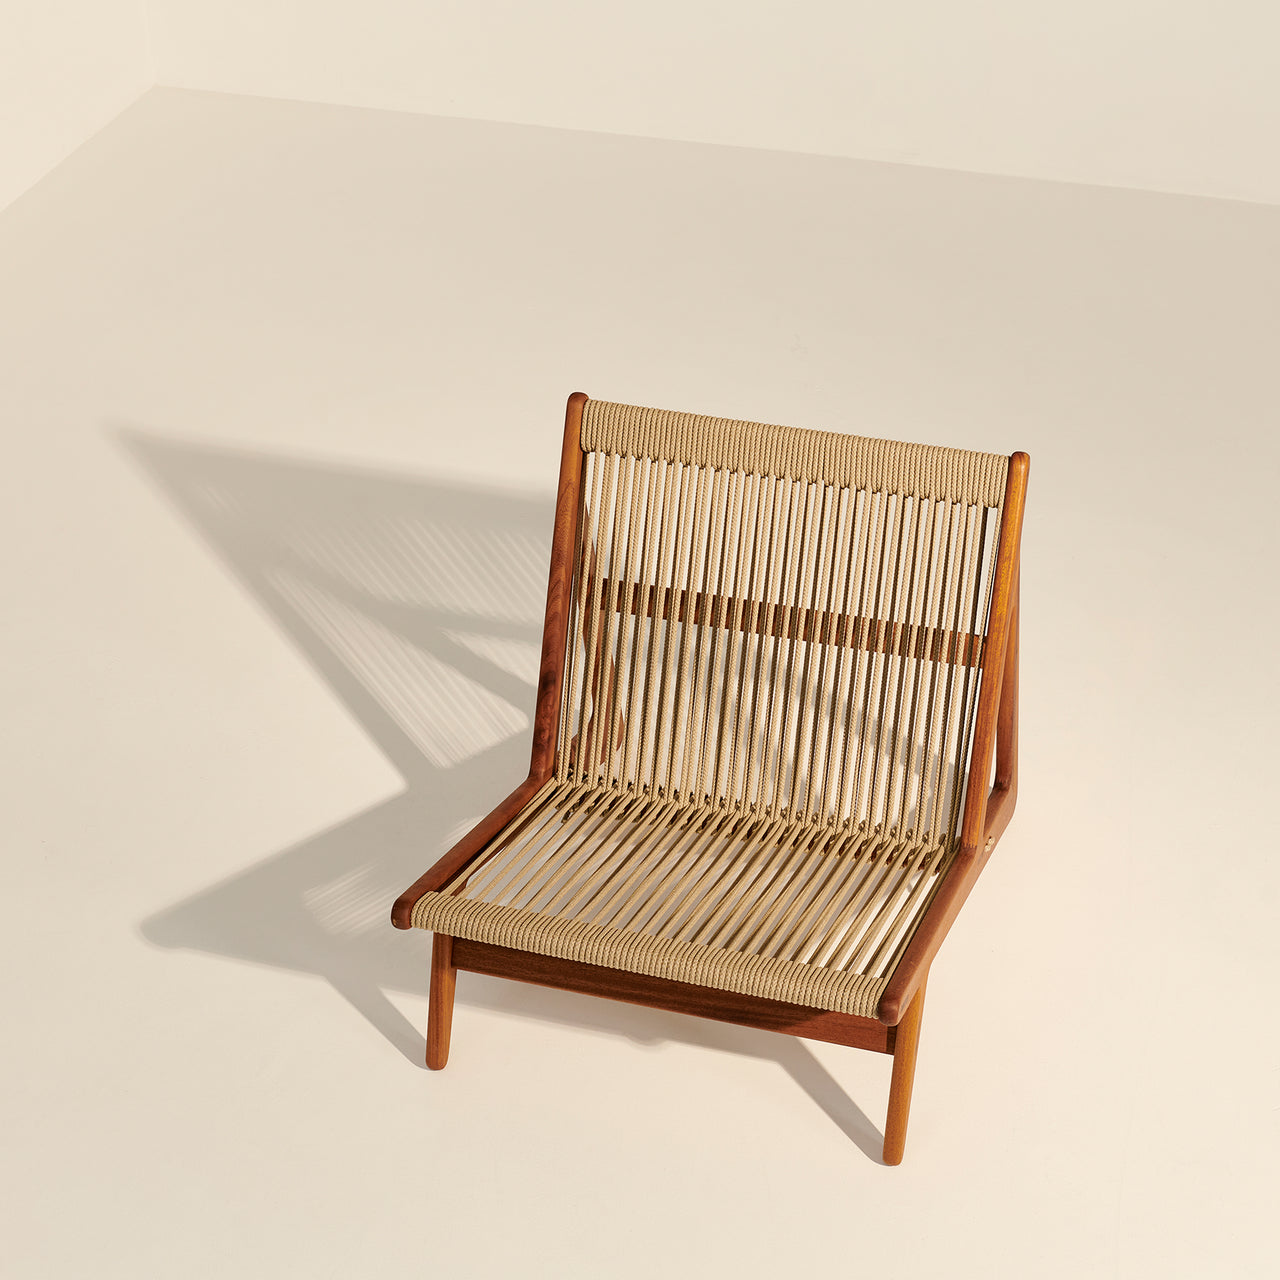 MR01 Initial Lounge Chair: Outdoor